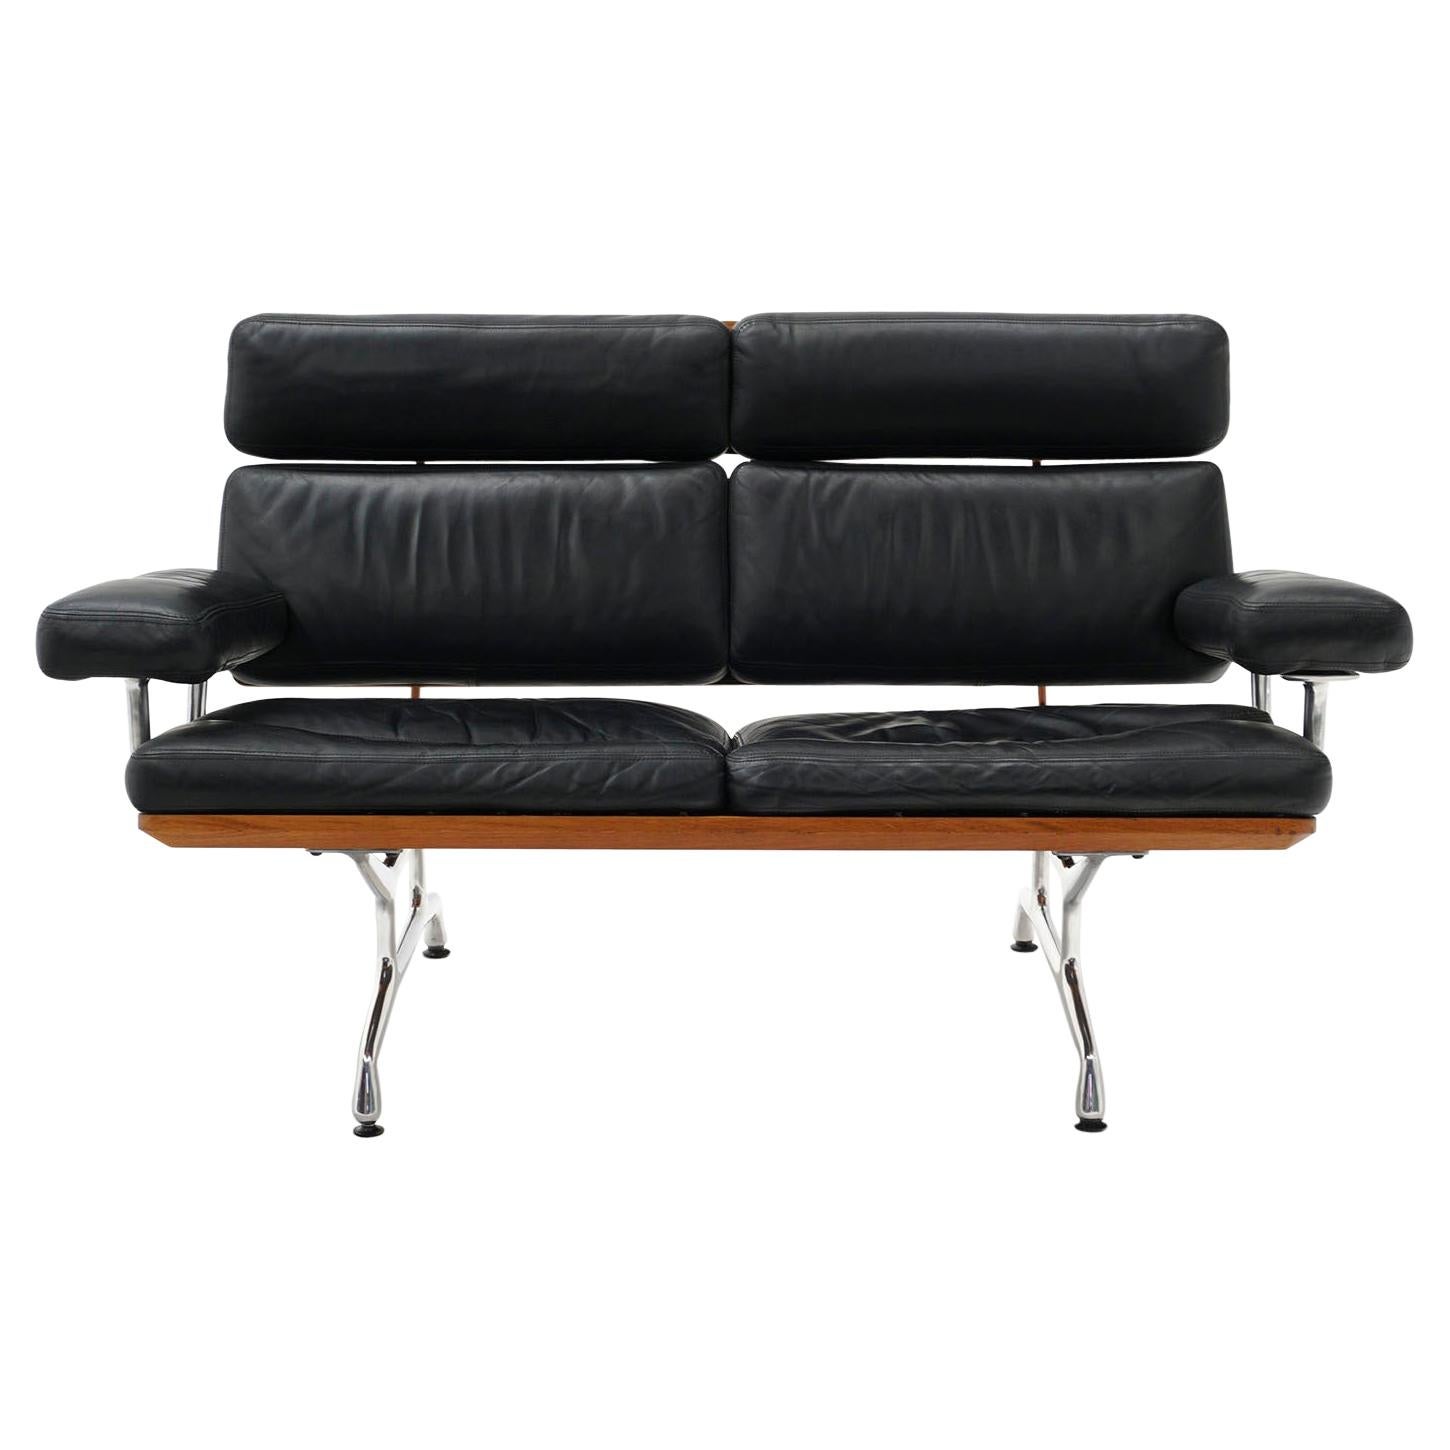 2 Seat Sofa Settee by Charles and Ray Eames, Solid Walnut and Black Leather